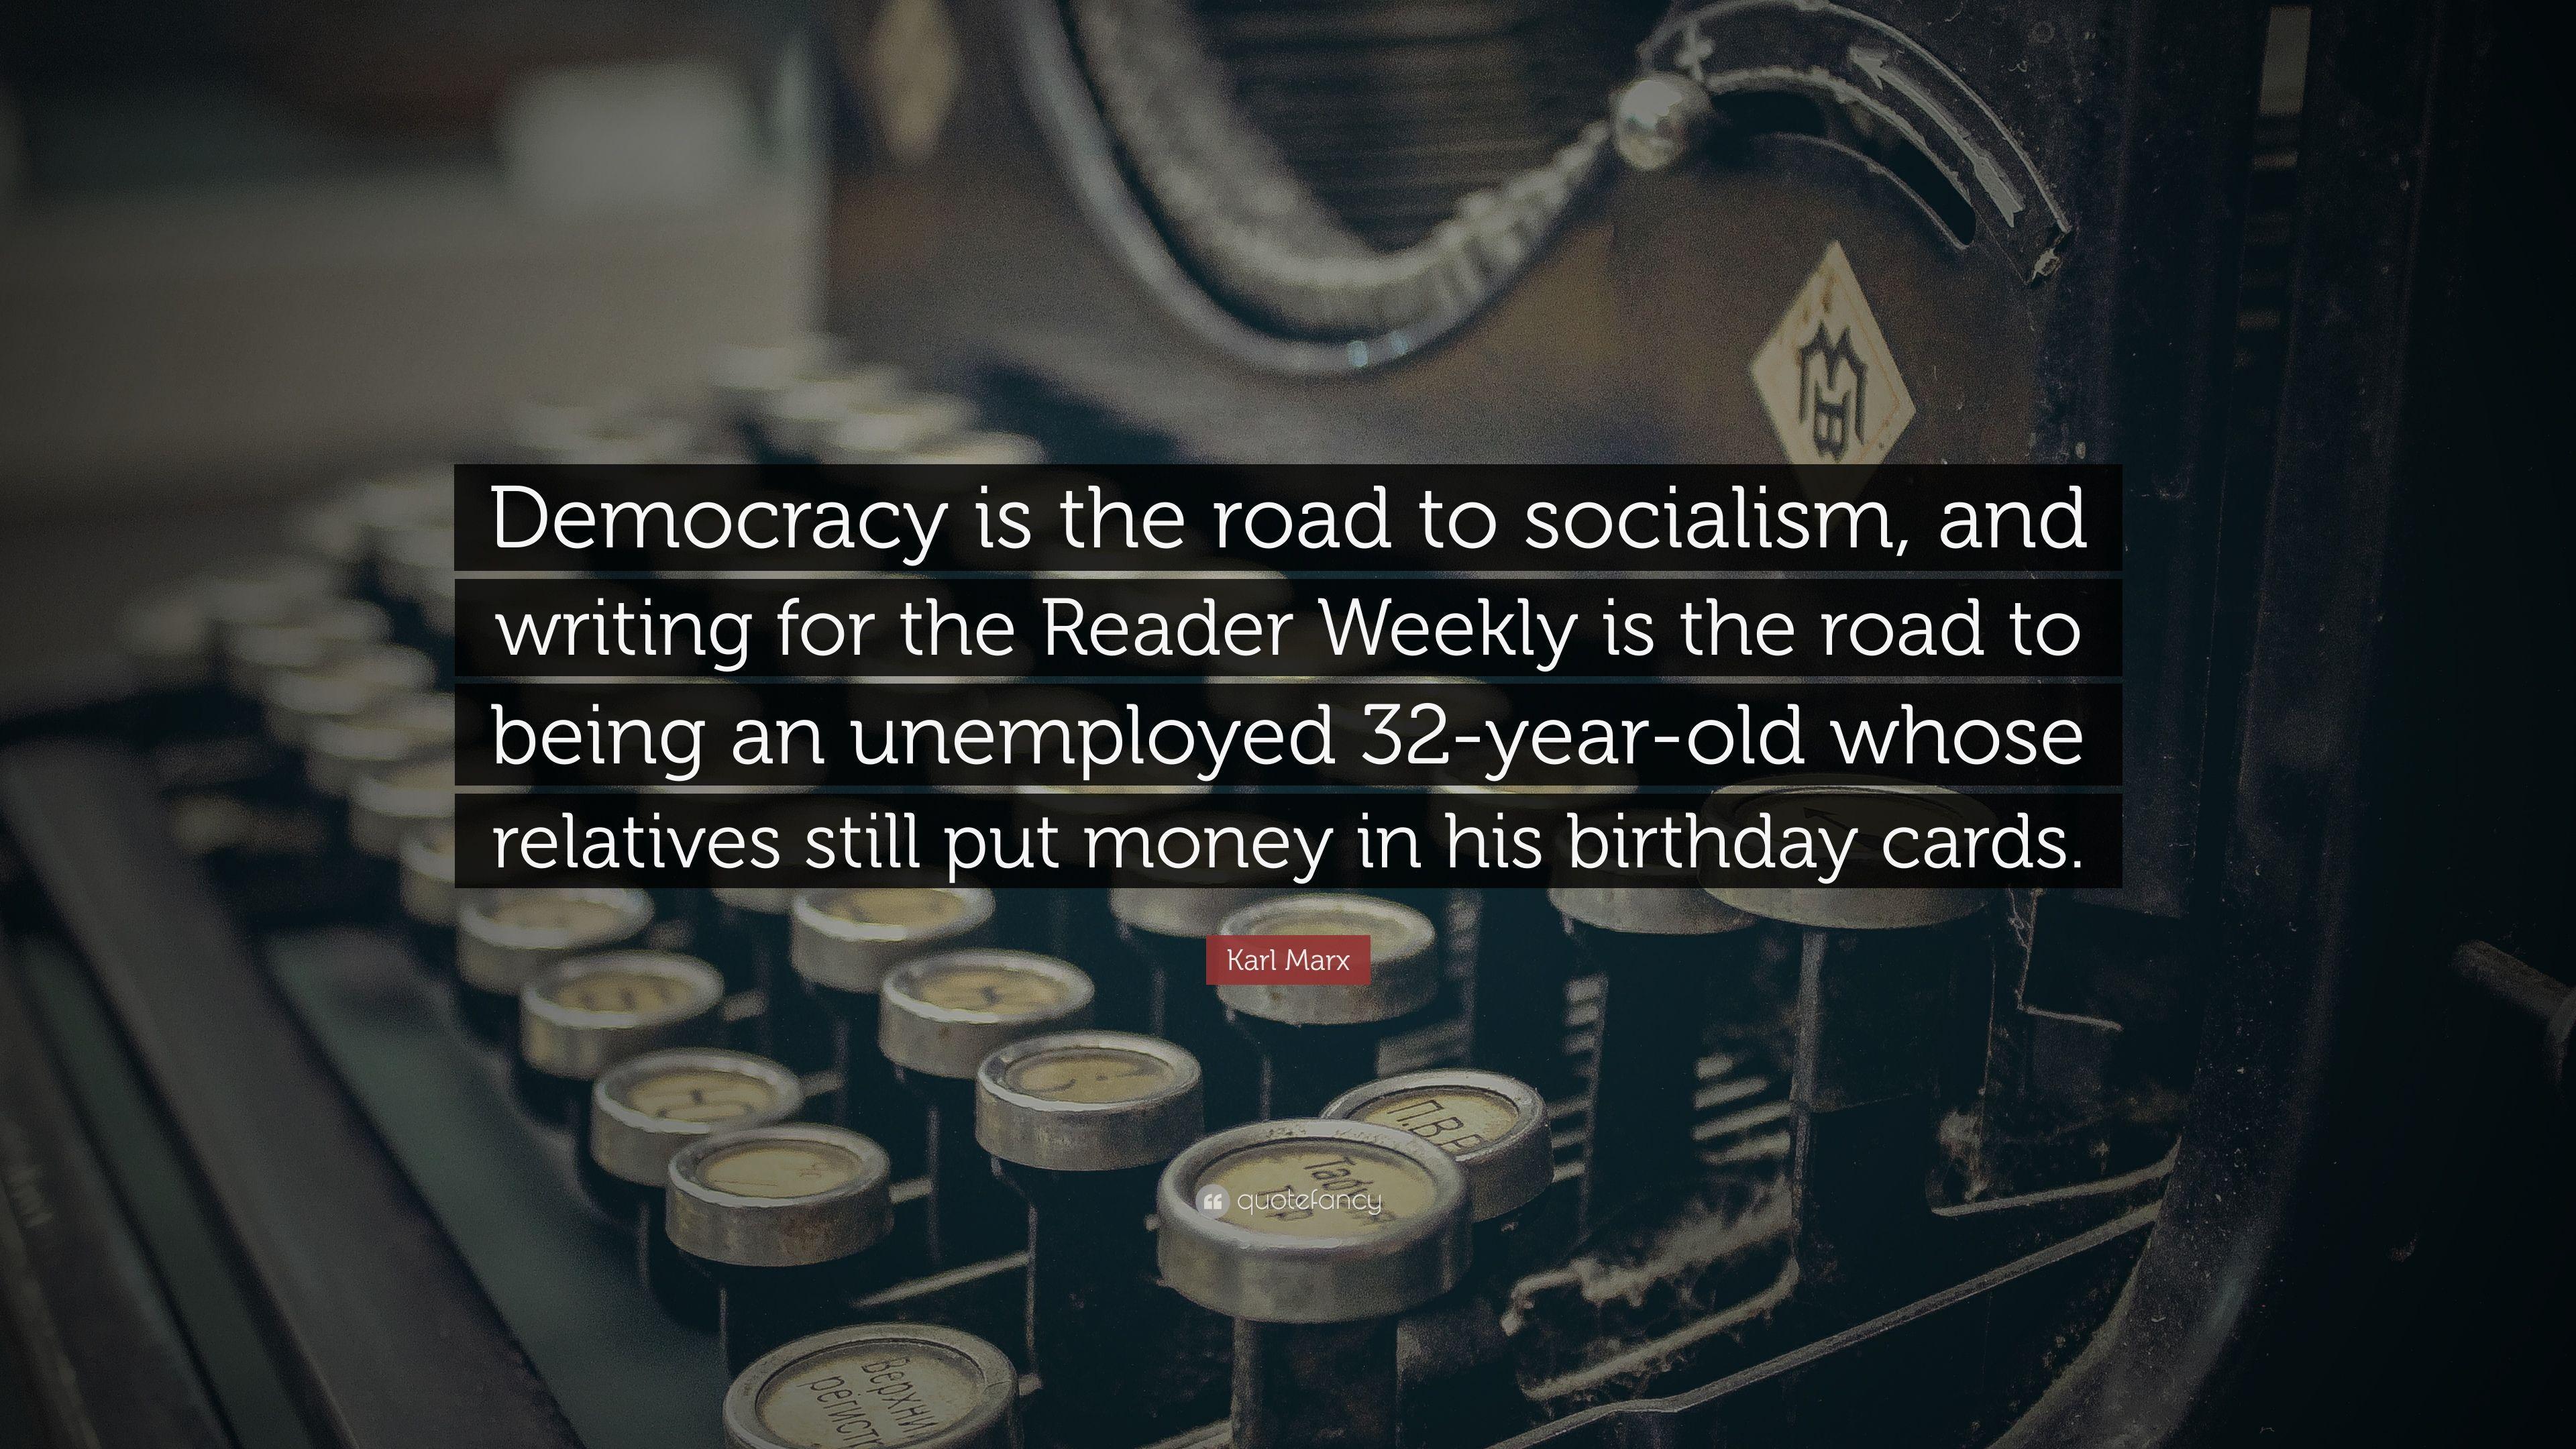 Karl Marx Quote: “Democracy is the road to socialism, and writing